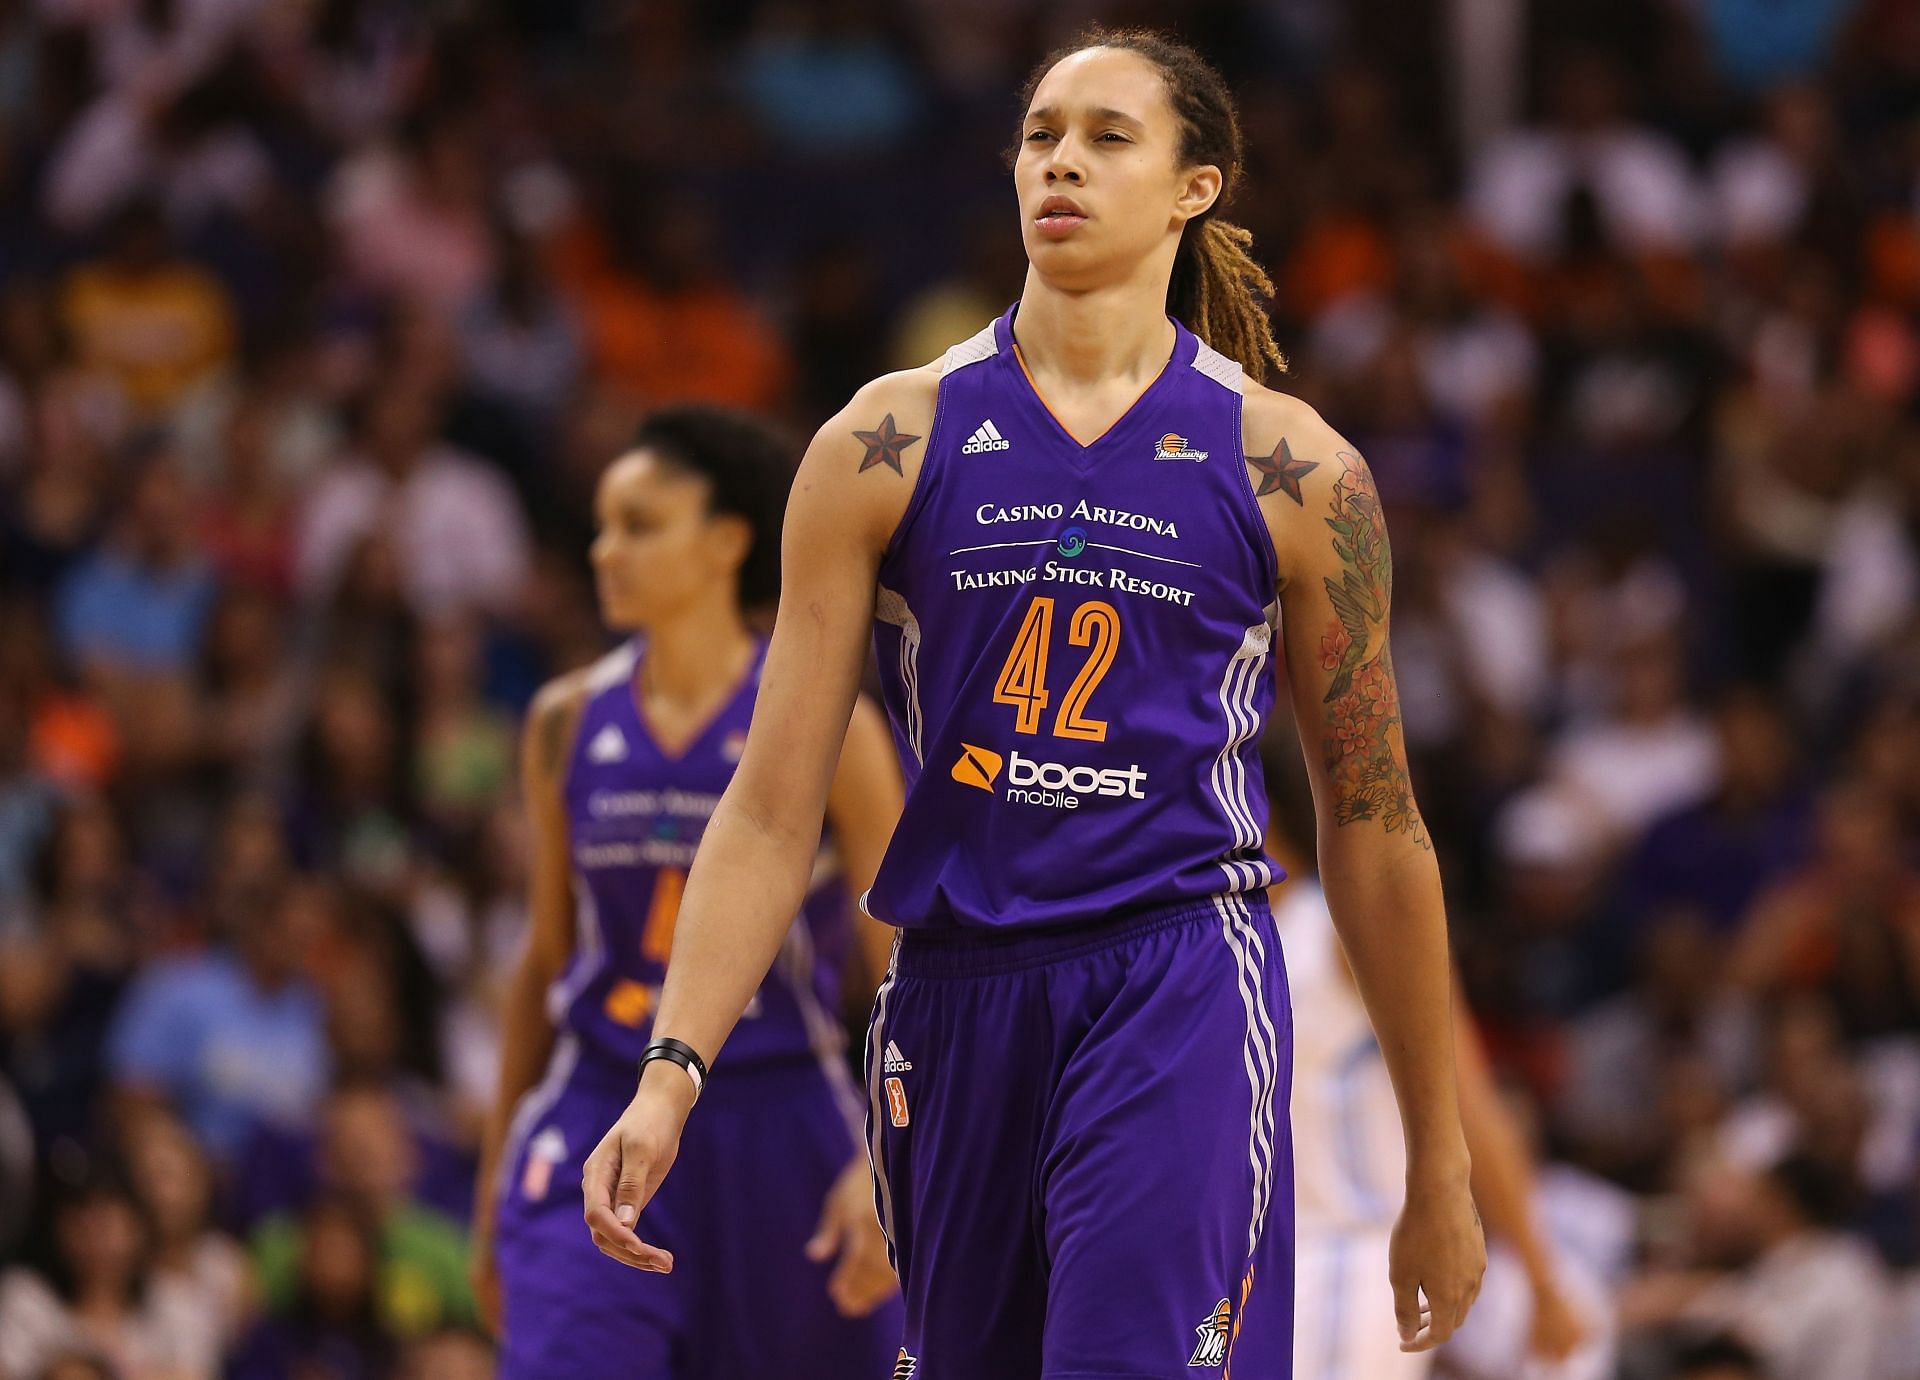 Griner is one of the best WNBA players.